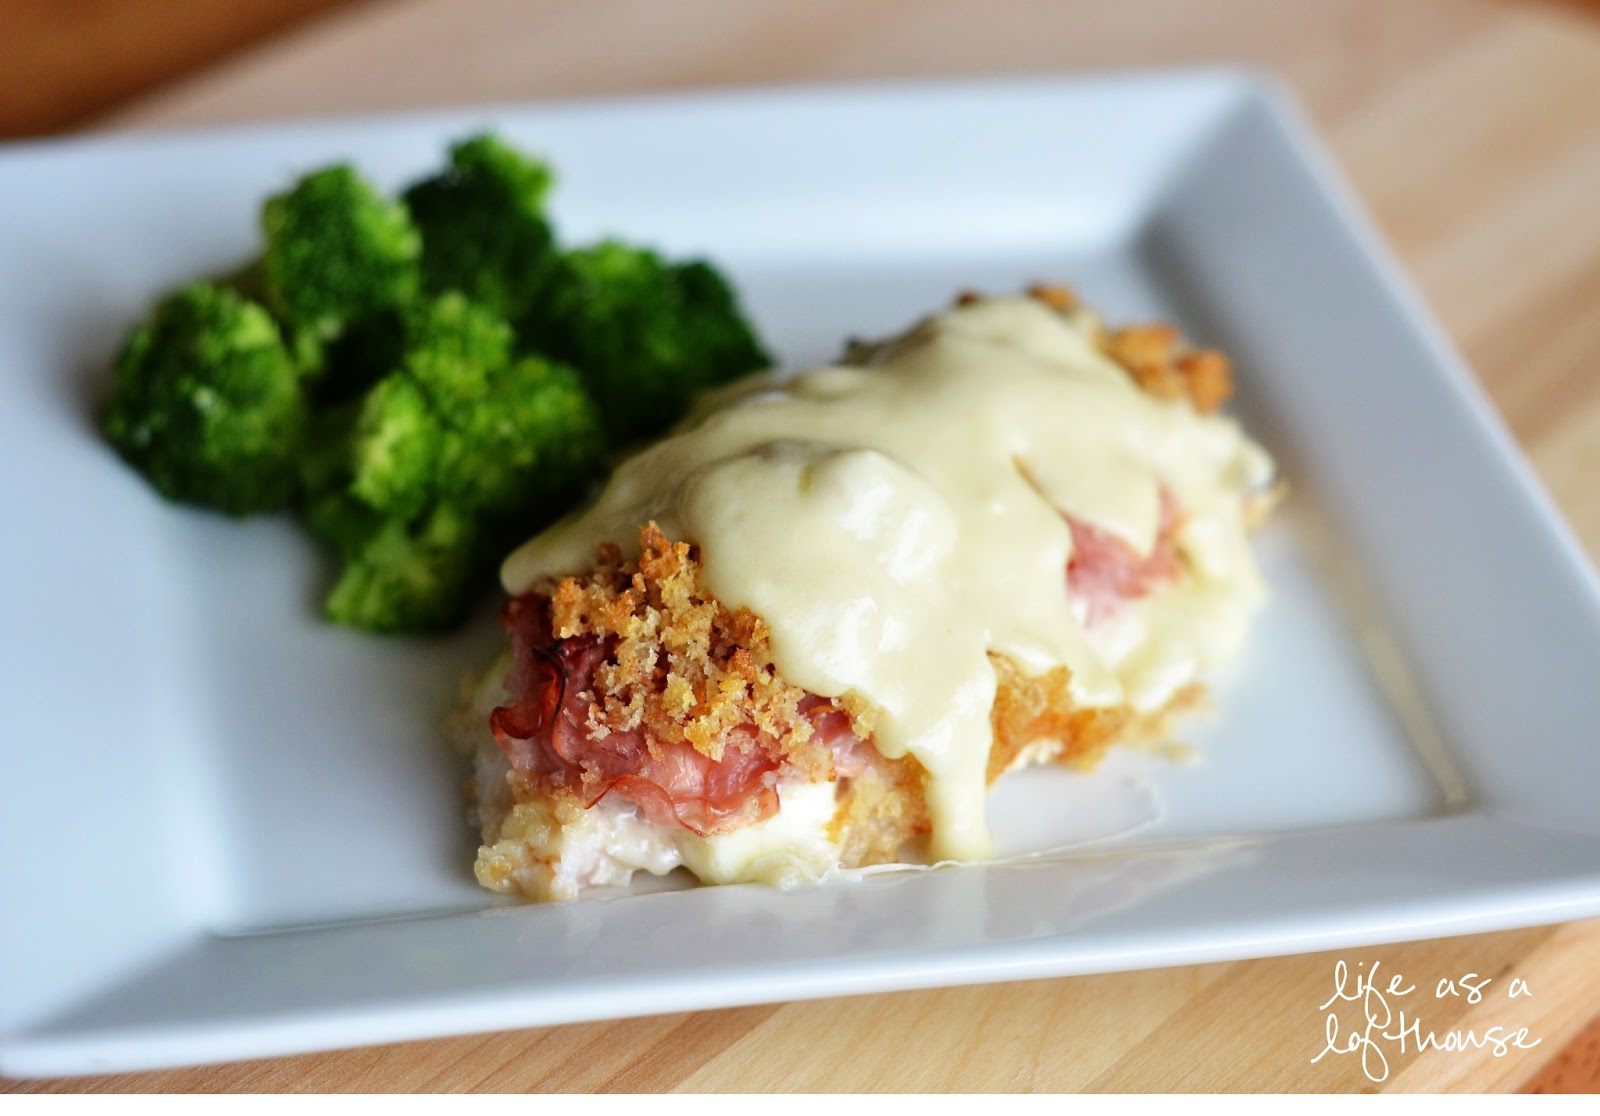 What side dishes are good with Chicken Cordon Bleu?